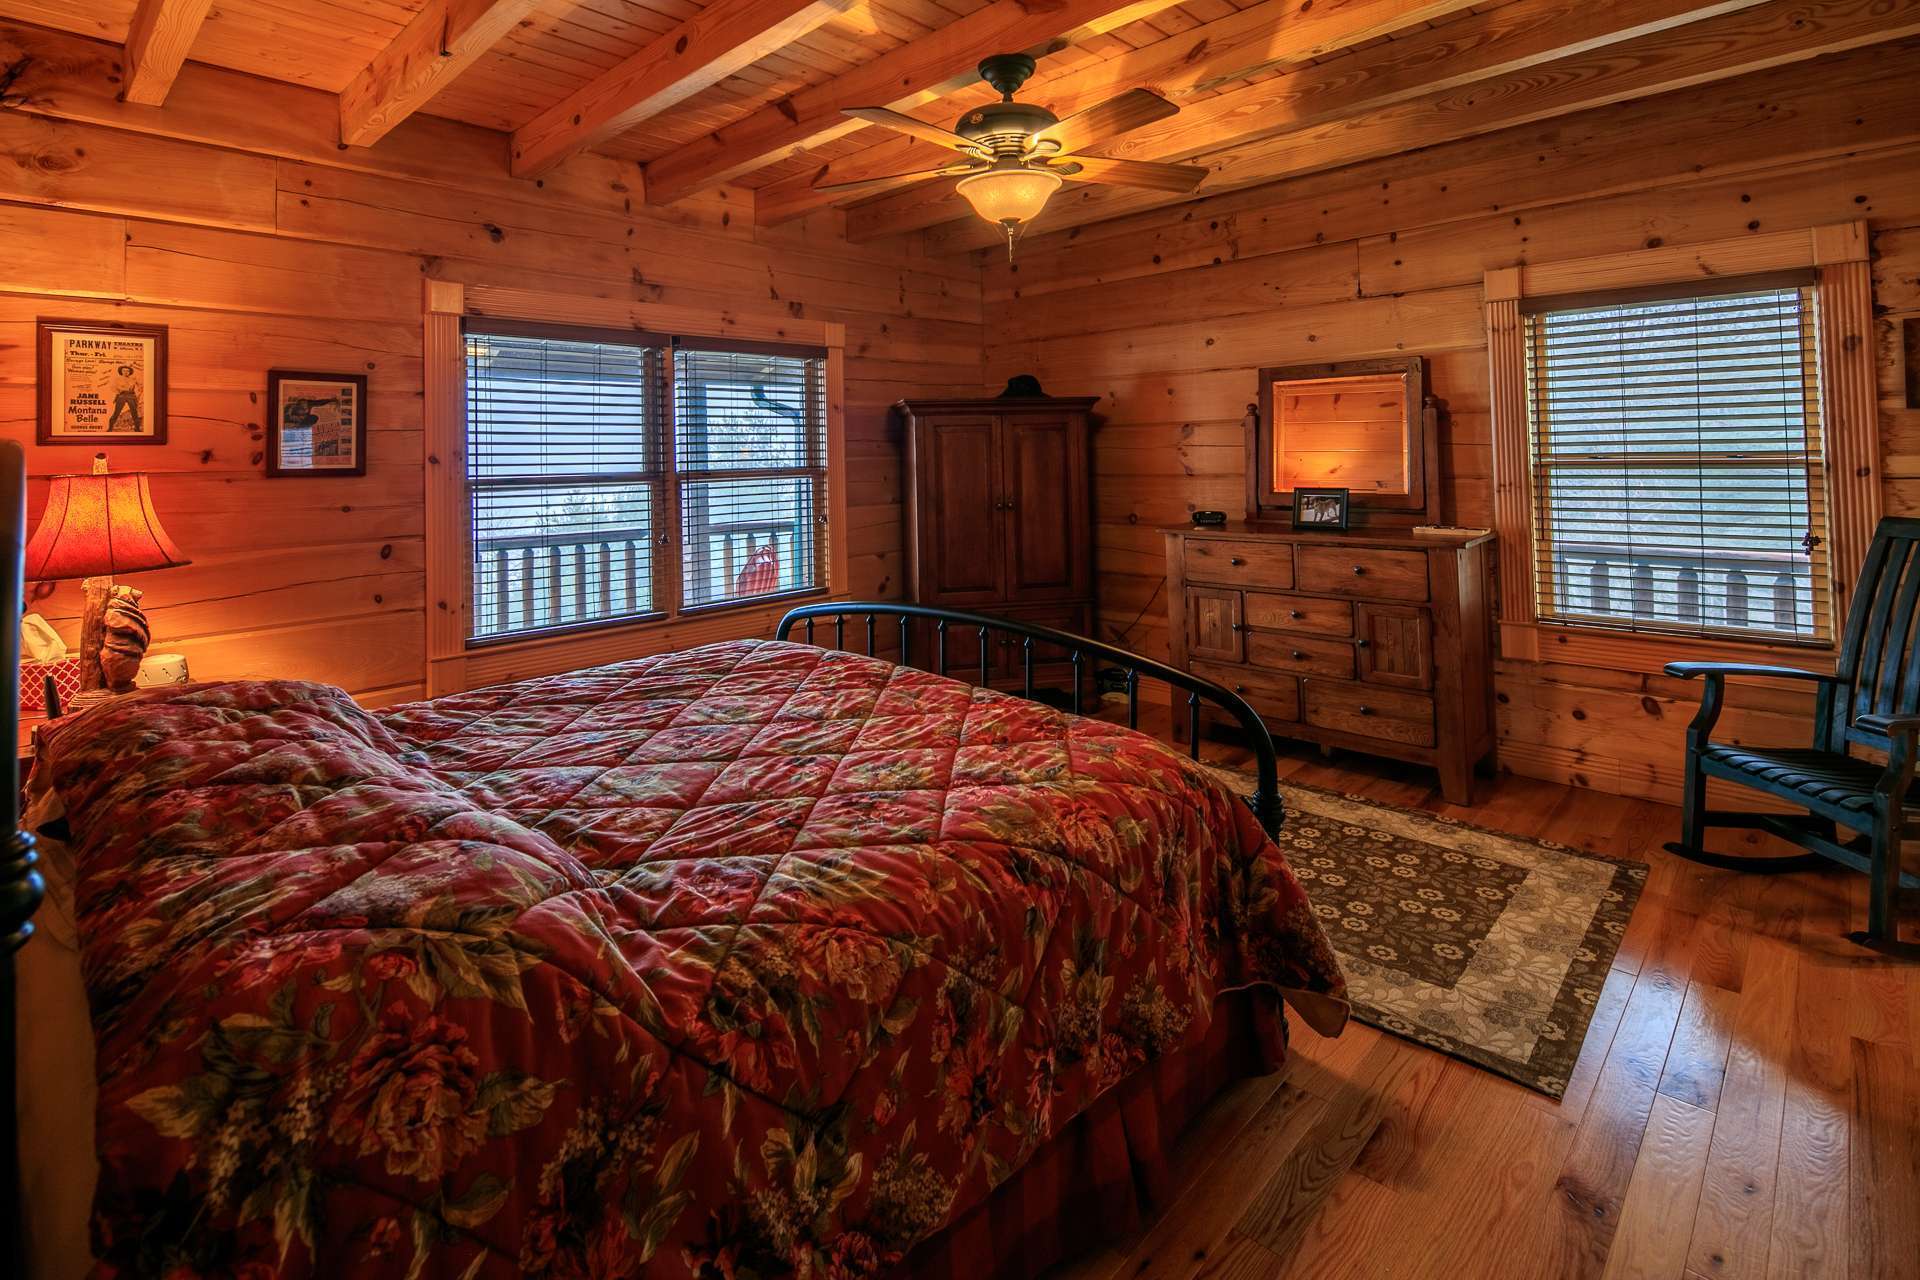 Conveniently located on the main level, the master suite offers a retreat at the end of a busy day of mountain activities.  Features include beamed ceiling, lots of natural light, walk-in closet, and a private bath.